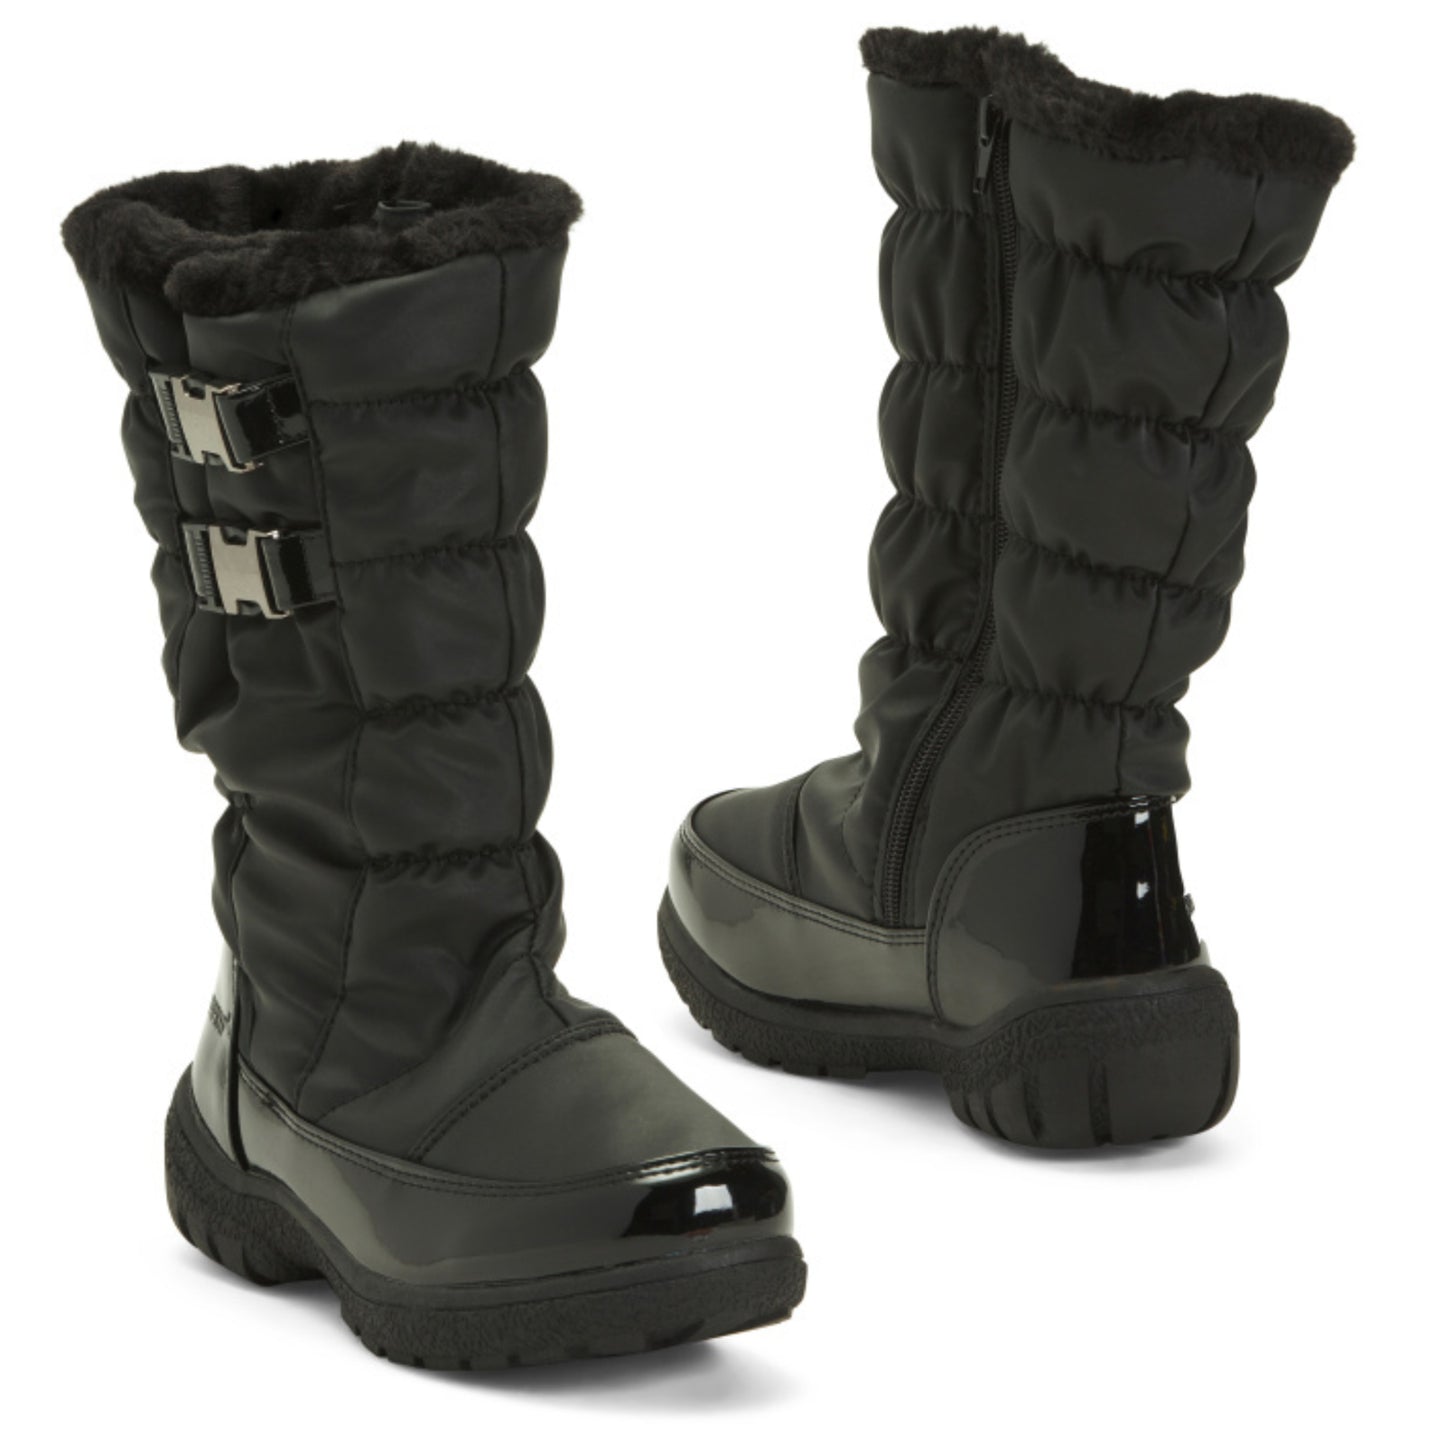 TOTES Two Buckle Nylon Storm Boots